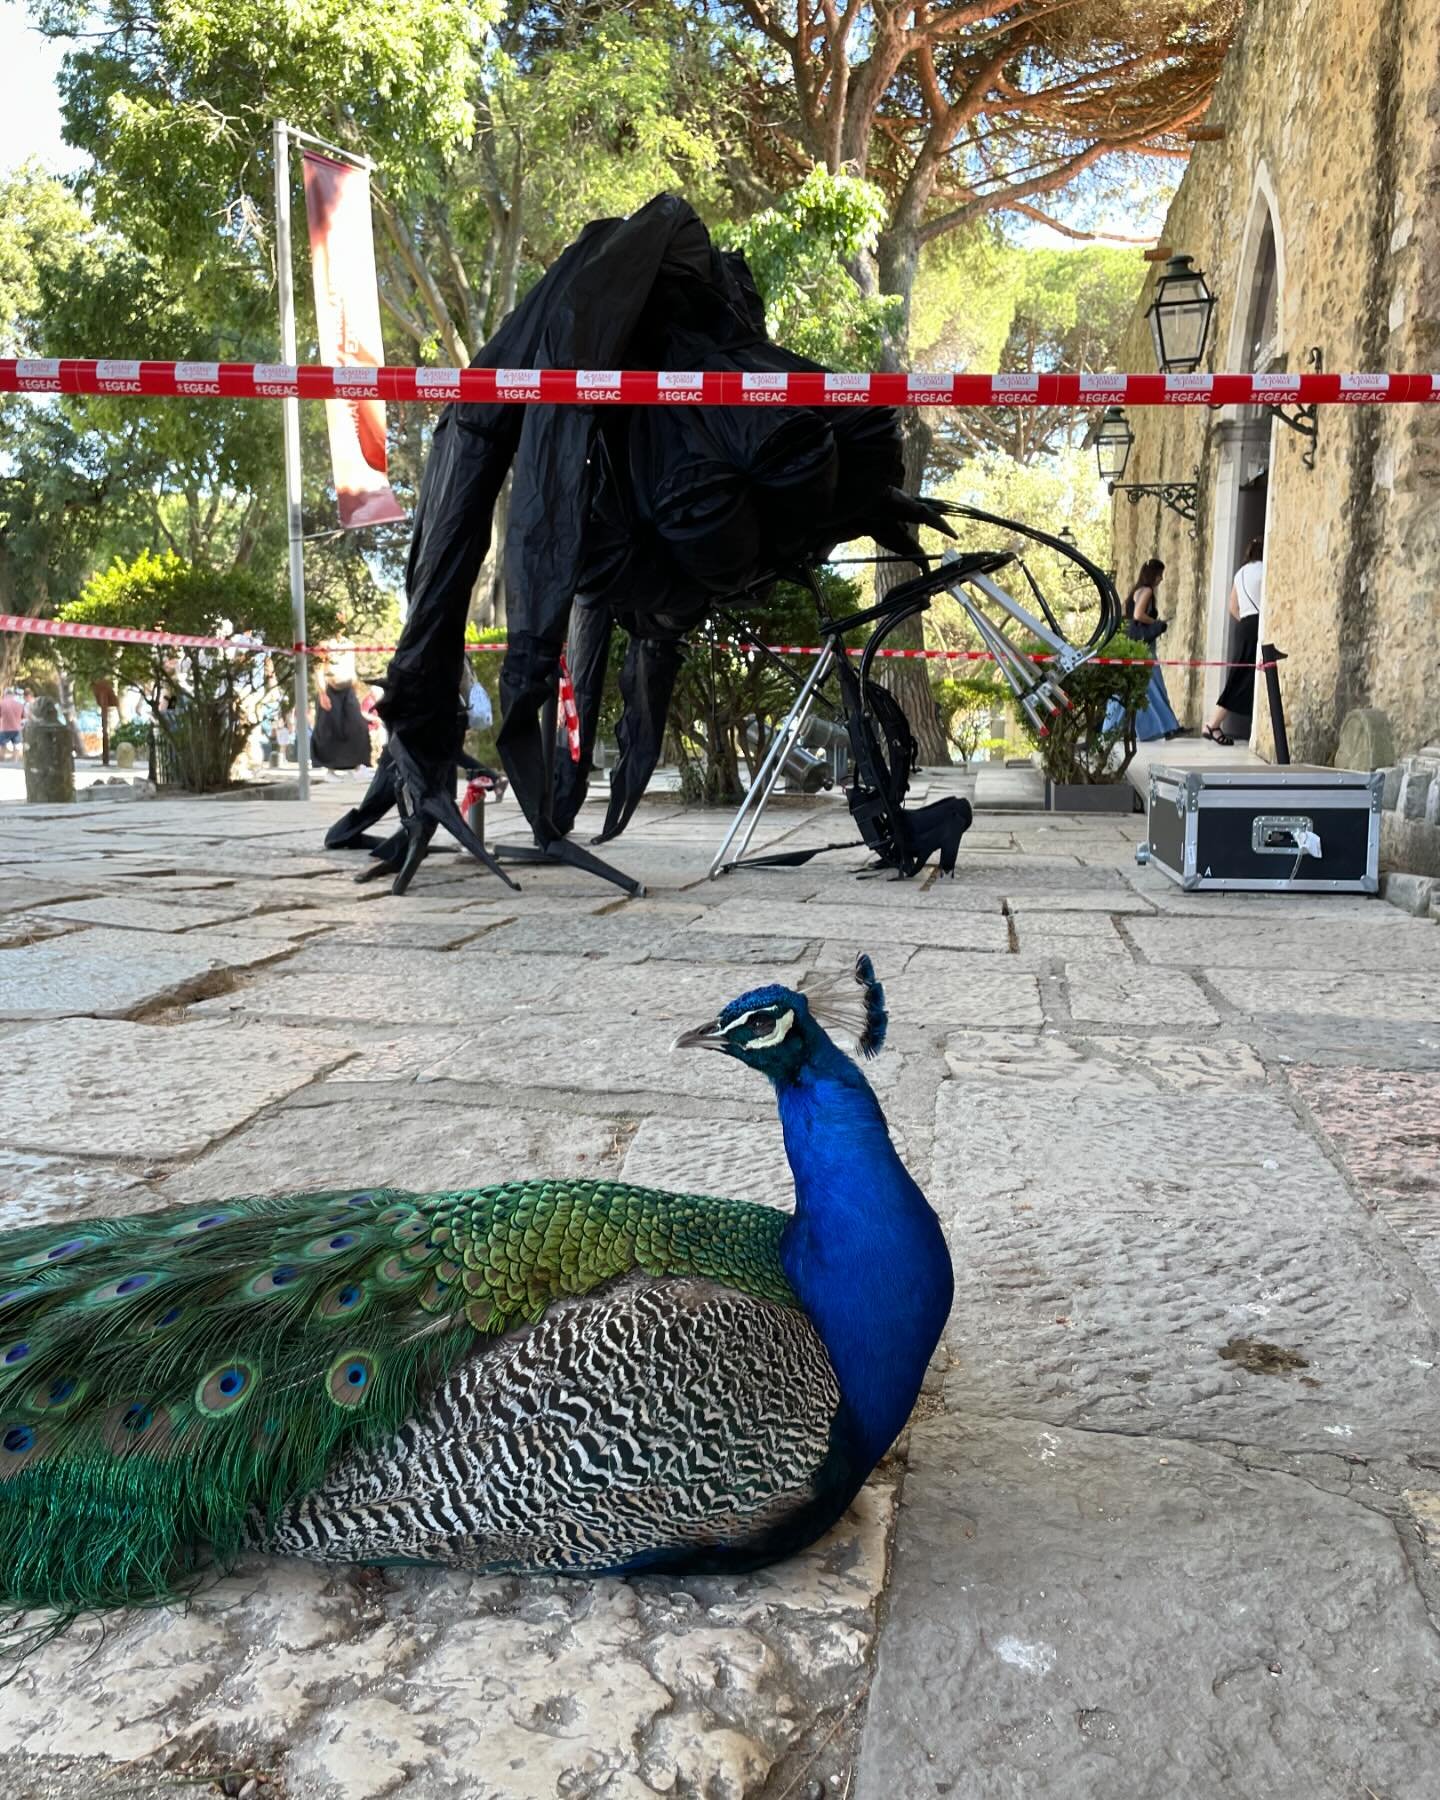 Setting up with the peacocks today at Castelo S. Jorge for #fimfa in #lisbon